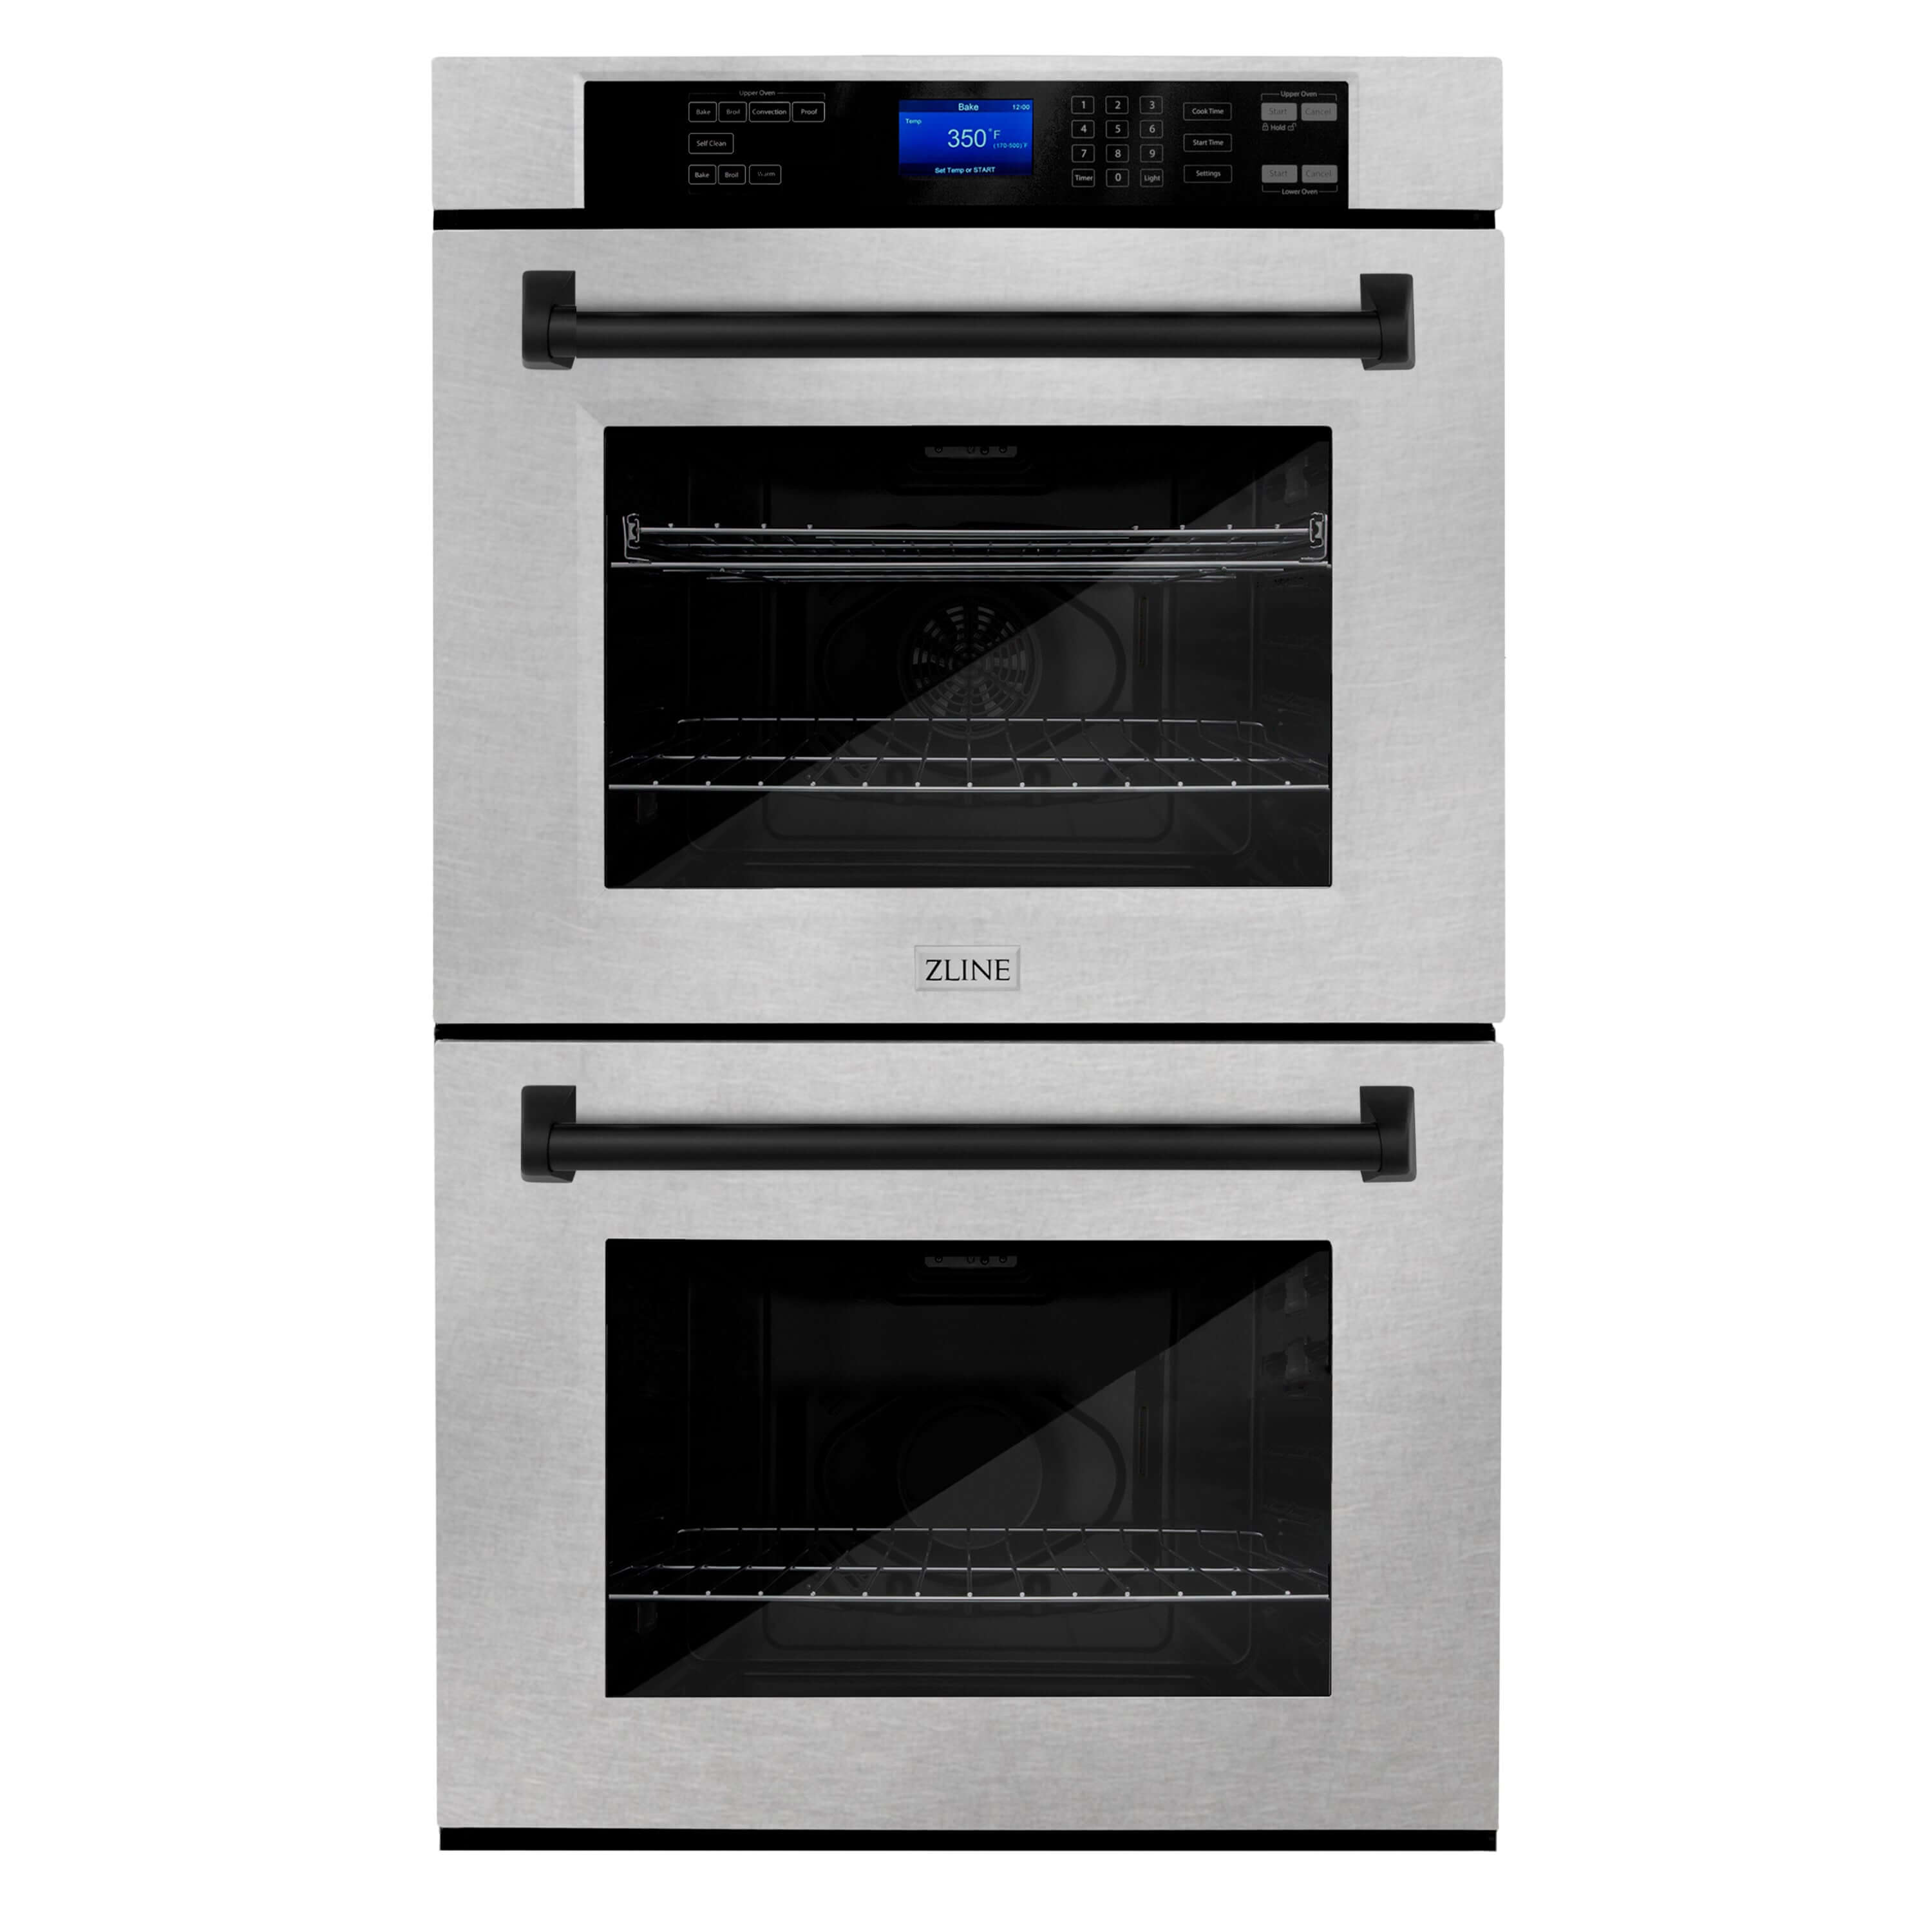 ZLINE Autograph Edition 30 in. Electric Double Wall Oven with Self Clean and True Convection in DuraSnow Stainless Steel and Matte Black Accents (AWDSZ-30-MB)